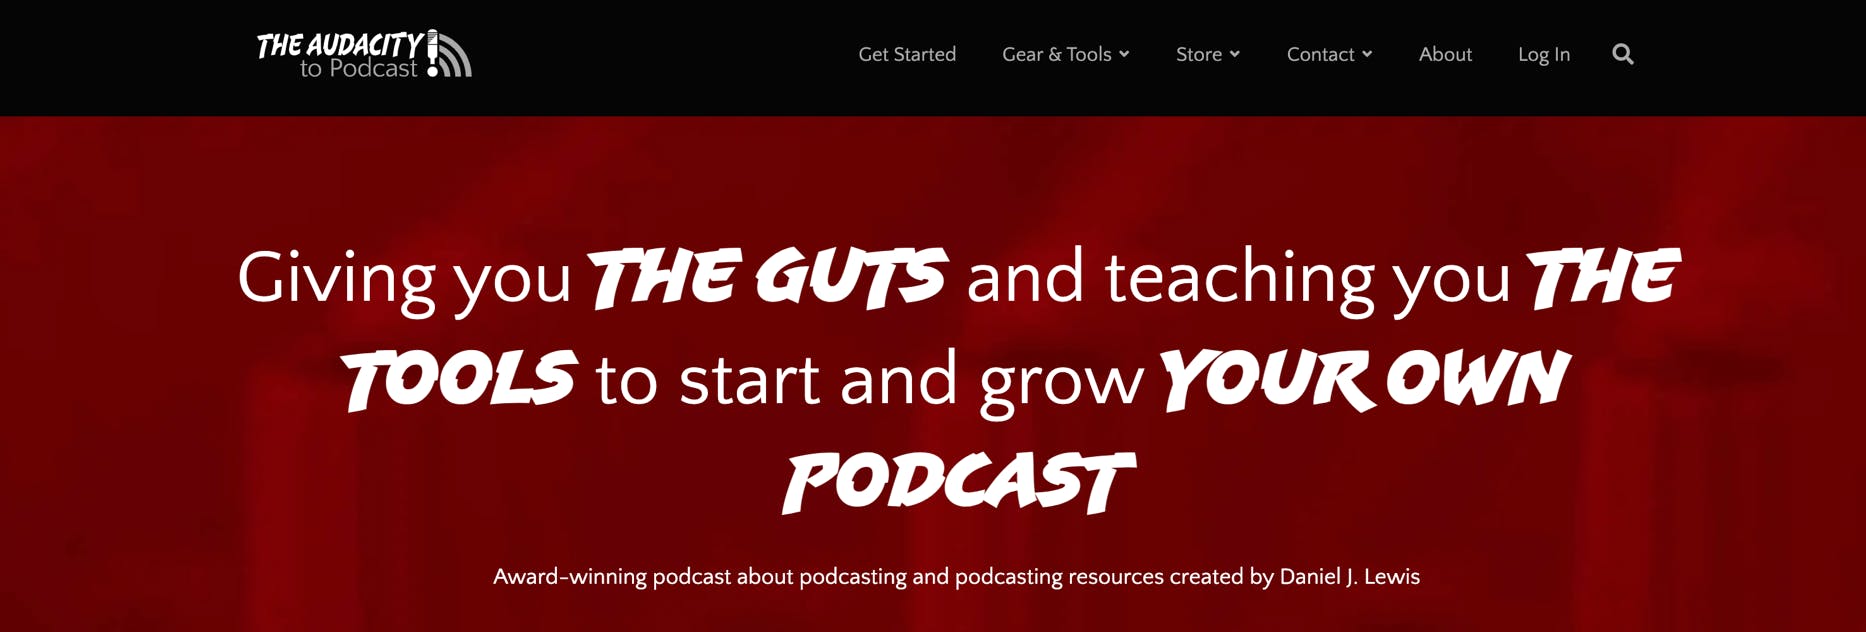 The Audacity to Podcast homepage with red background and white text overlay